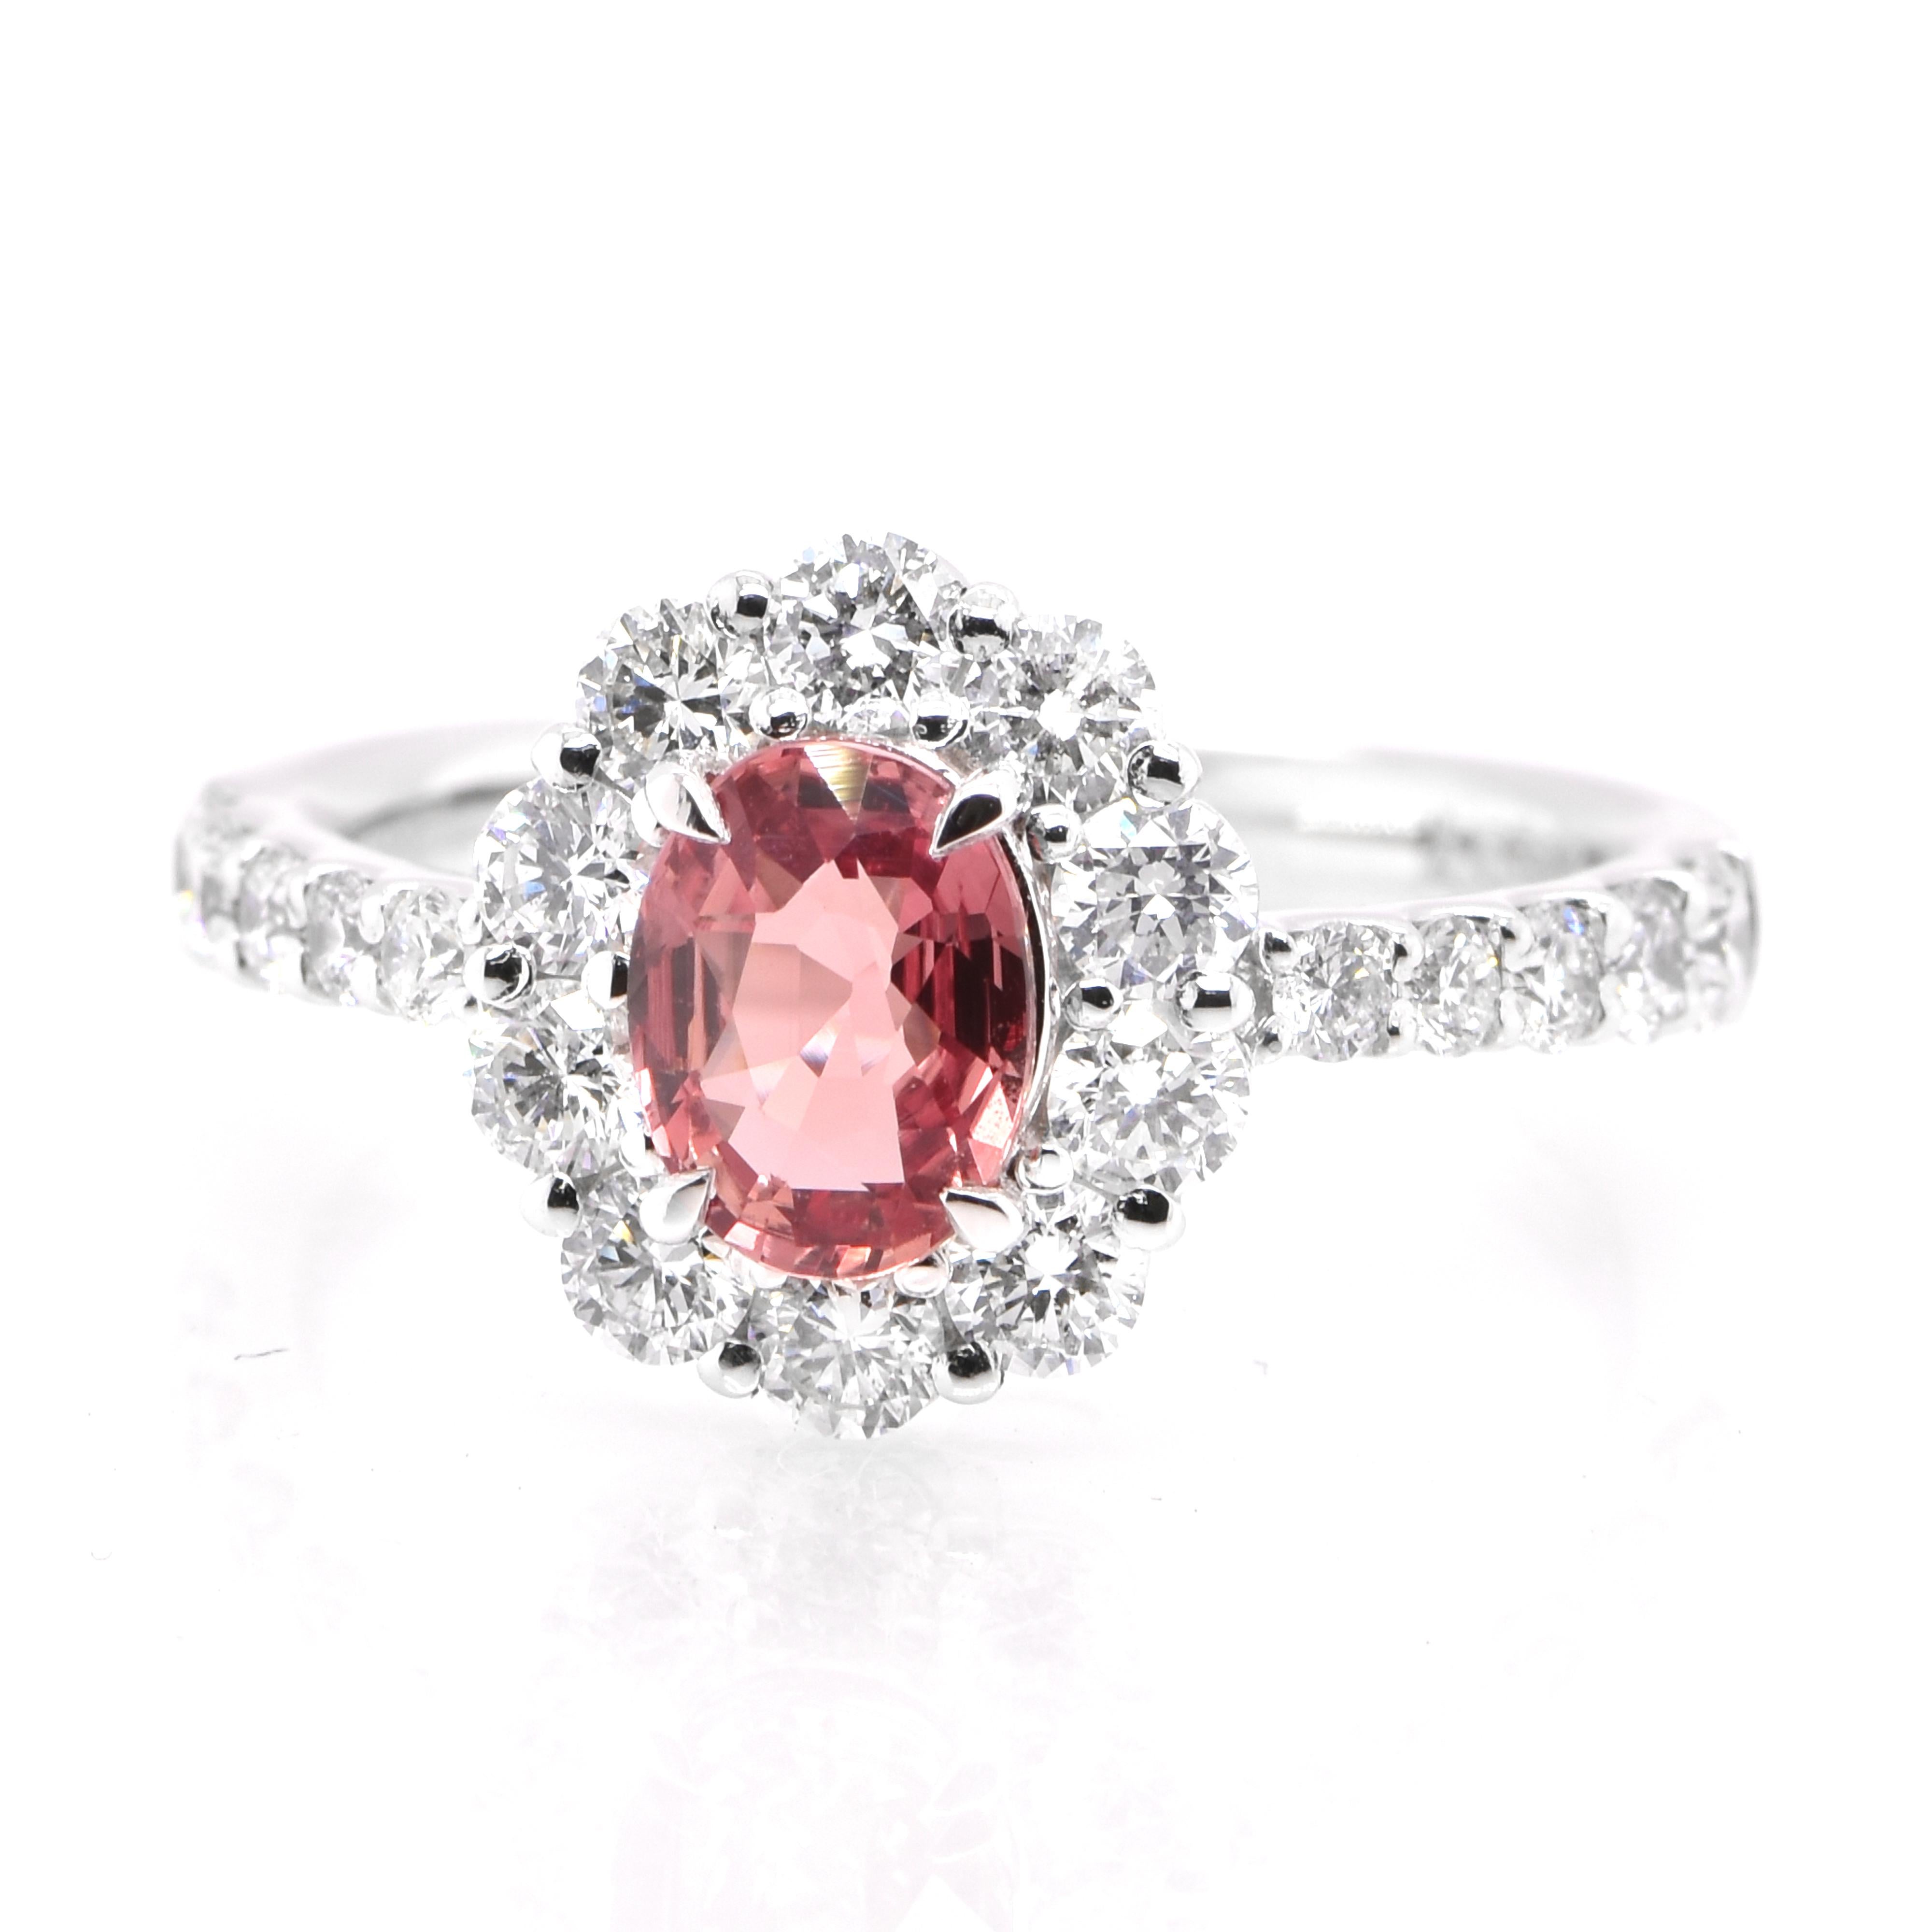 A beautiful ring featuring GIA Certified 1.02 Carat Natural, UnheatedPadparadscha Sapphire and 0.97 Carats of Diamond Accents set in Platinum. Sapphires have extraordinary durability - they excel in hardness as well as toughness and durability